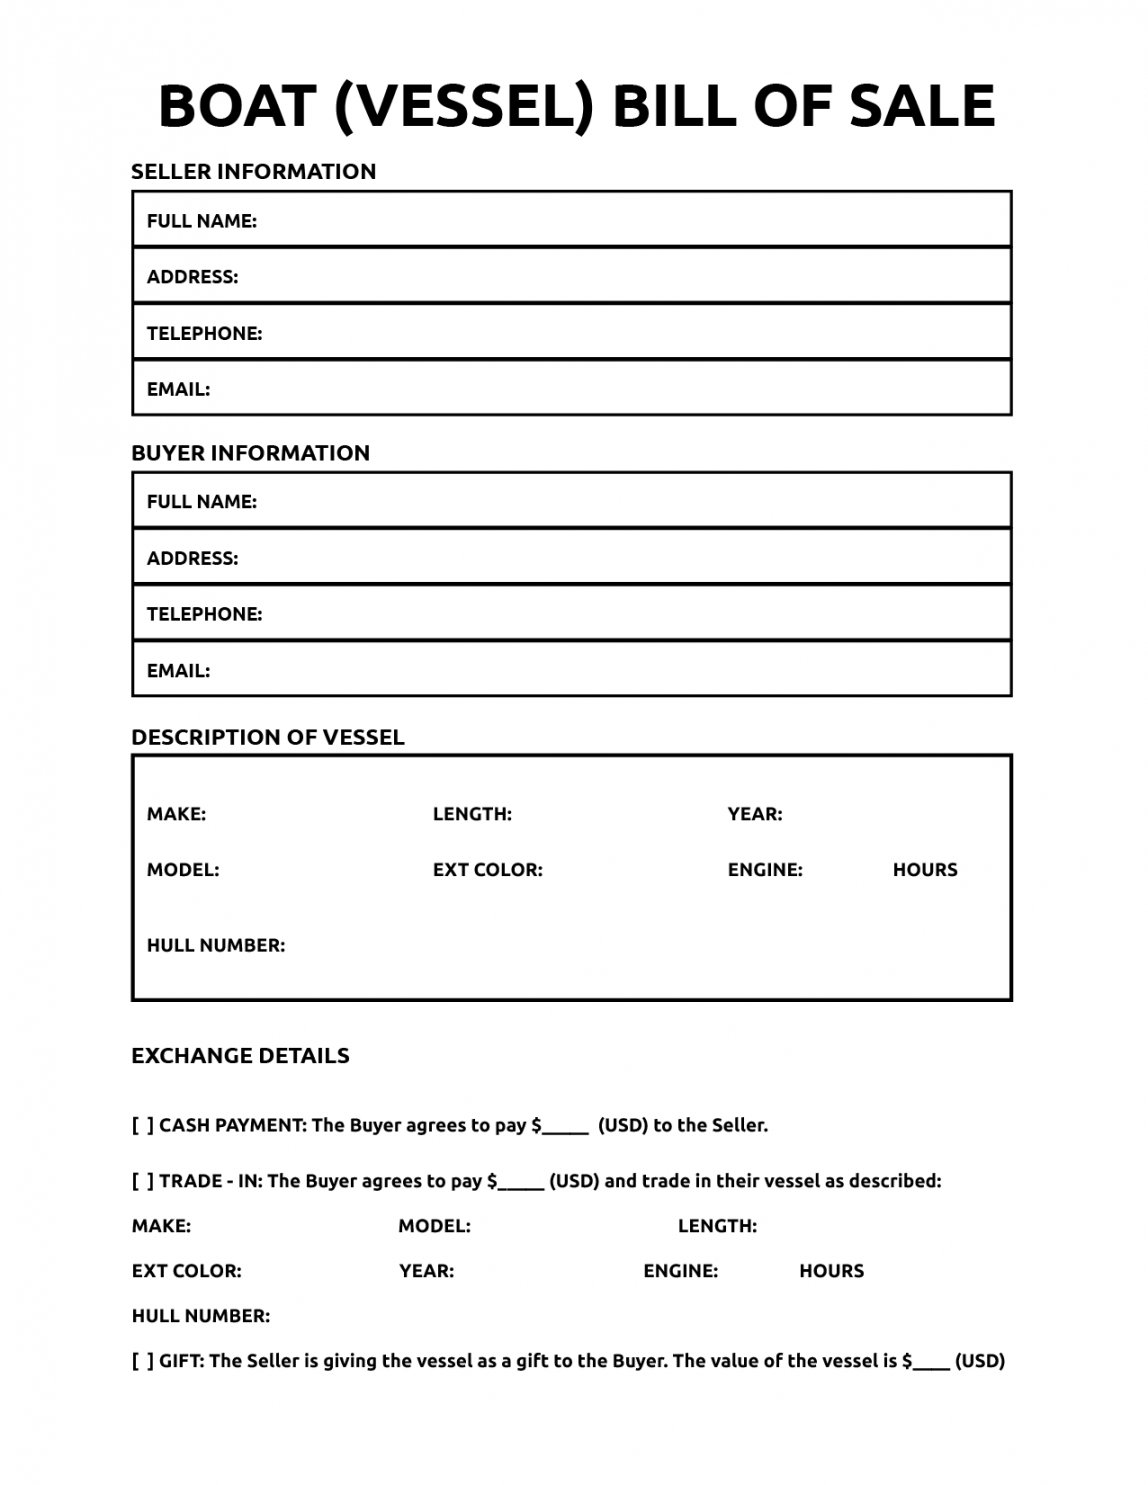 Bill of Sale For Boat - World of Printables - FREE Printables - Free Printable Bill Of Sale For Boat